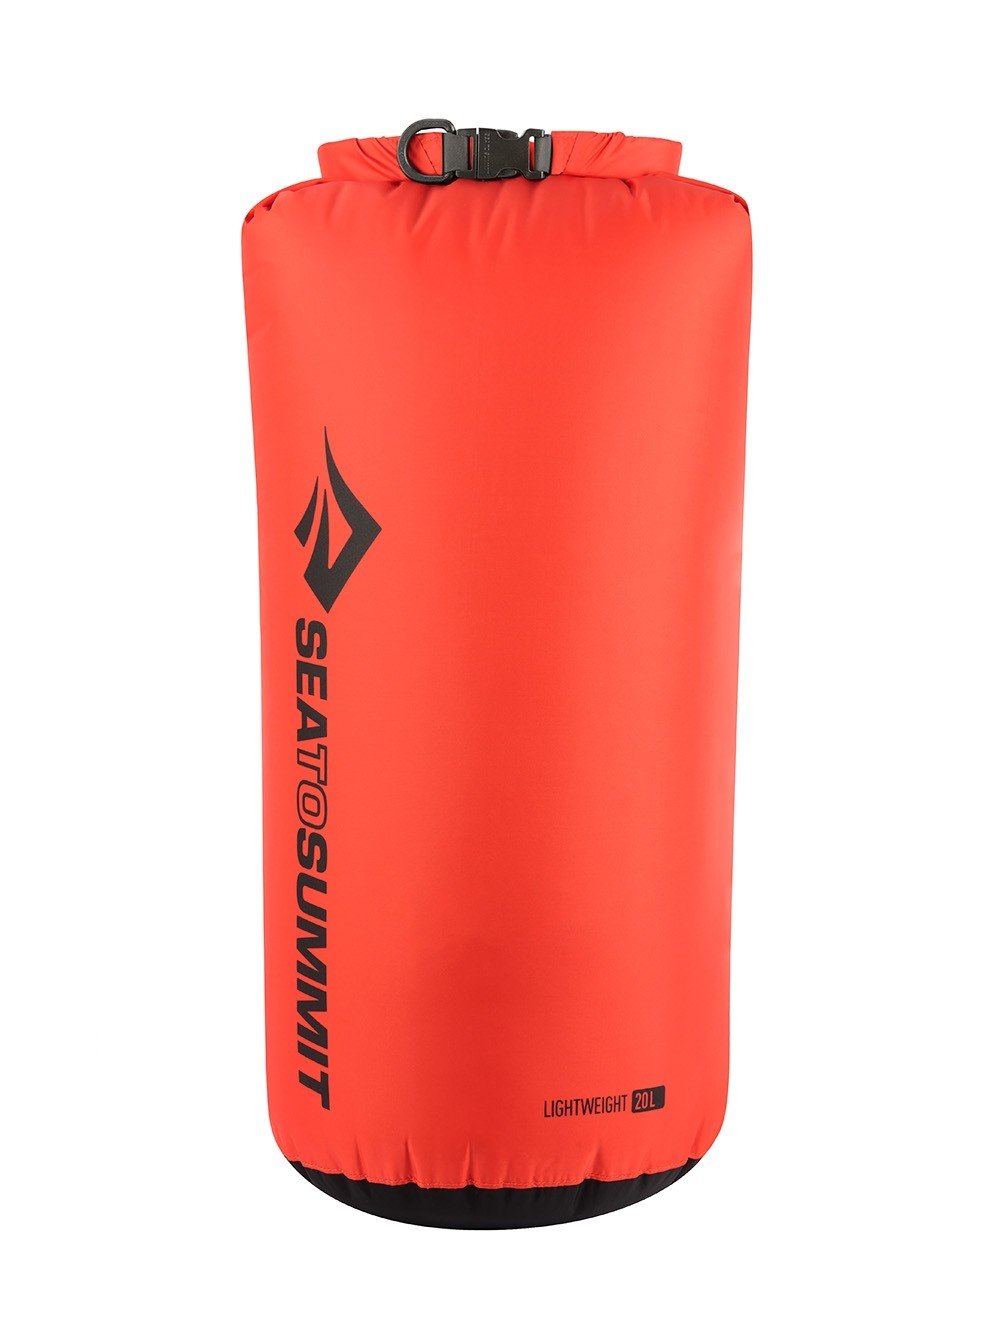 Sea To Summit Lightweight 70D 20 Litres Dry Sack Bags, Packs and Cases Sea To Summit Red Tactical Gear Supplier Tactical Distributors Australia